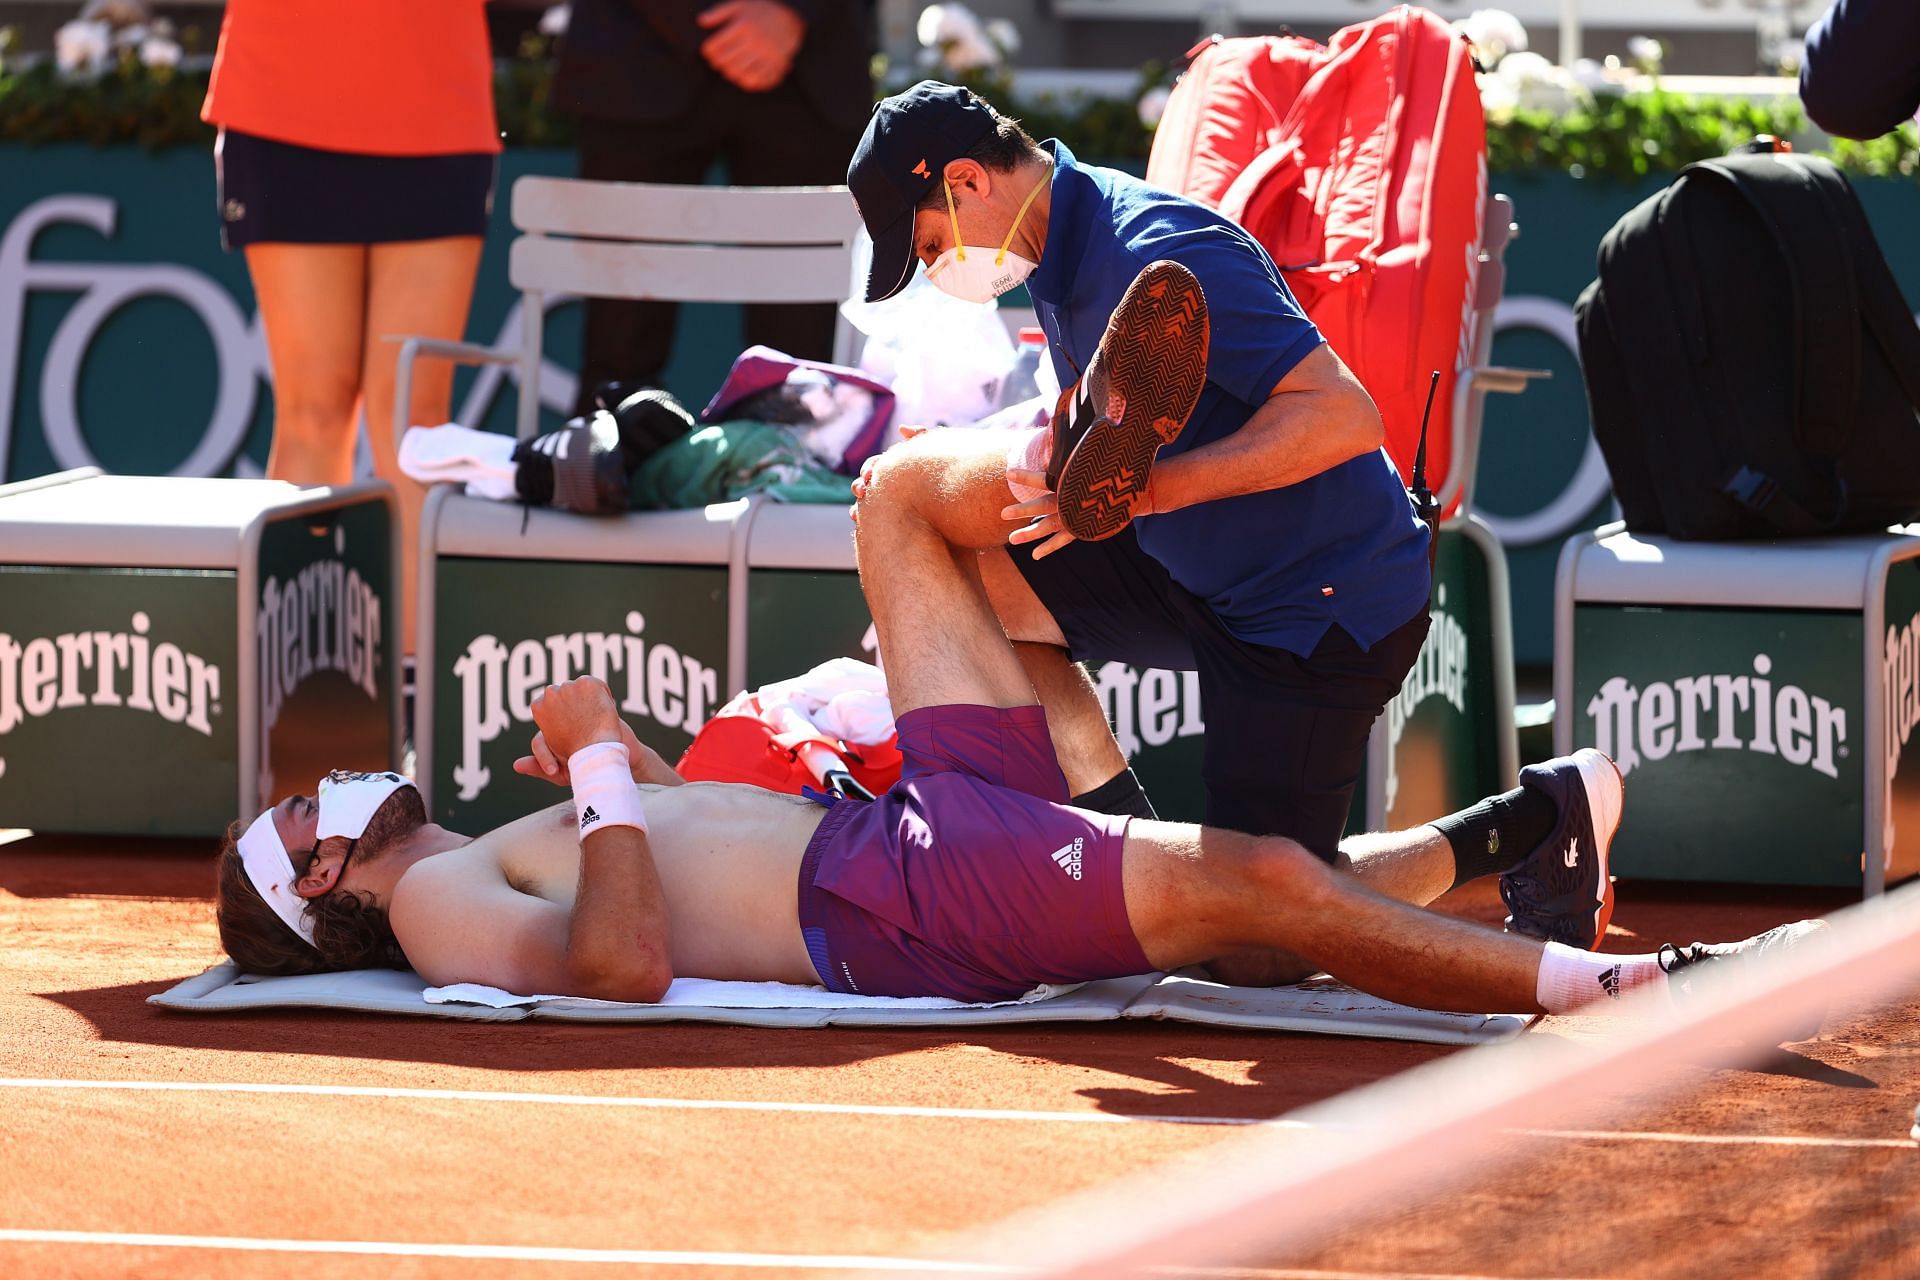 Stefanos Tsitsipas receives medical attention during a match at the 2021 French Open